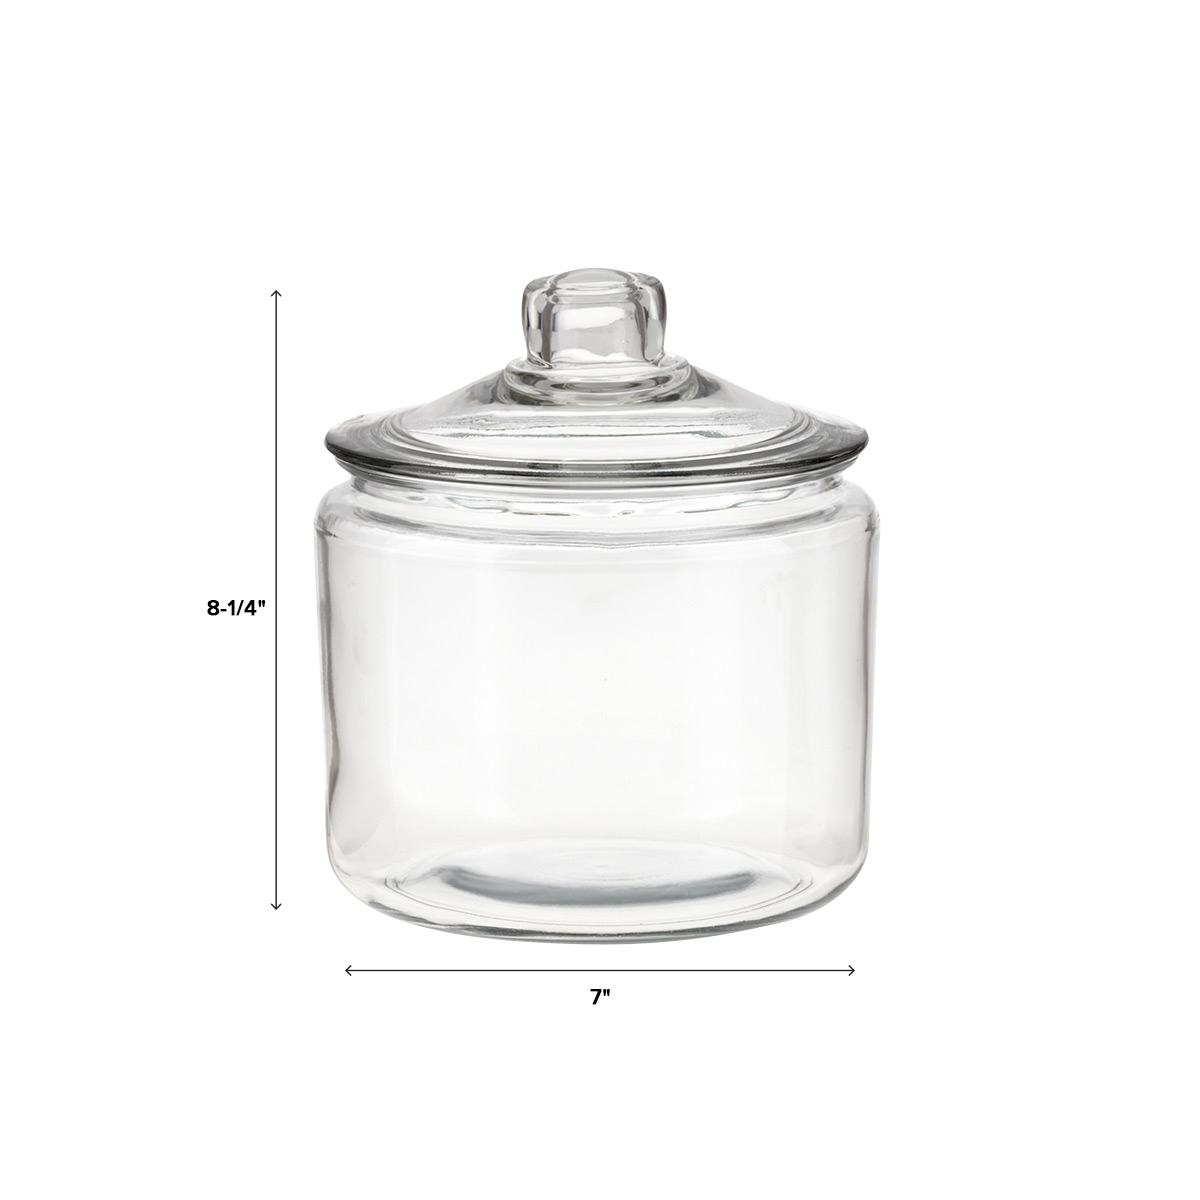 https://www.containerstore.com/catalogimages/447128/72200-GlassCanister3qt-DIM.jpg